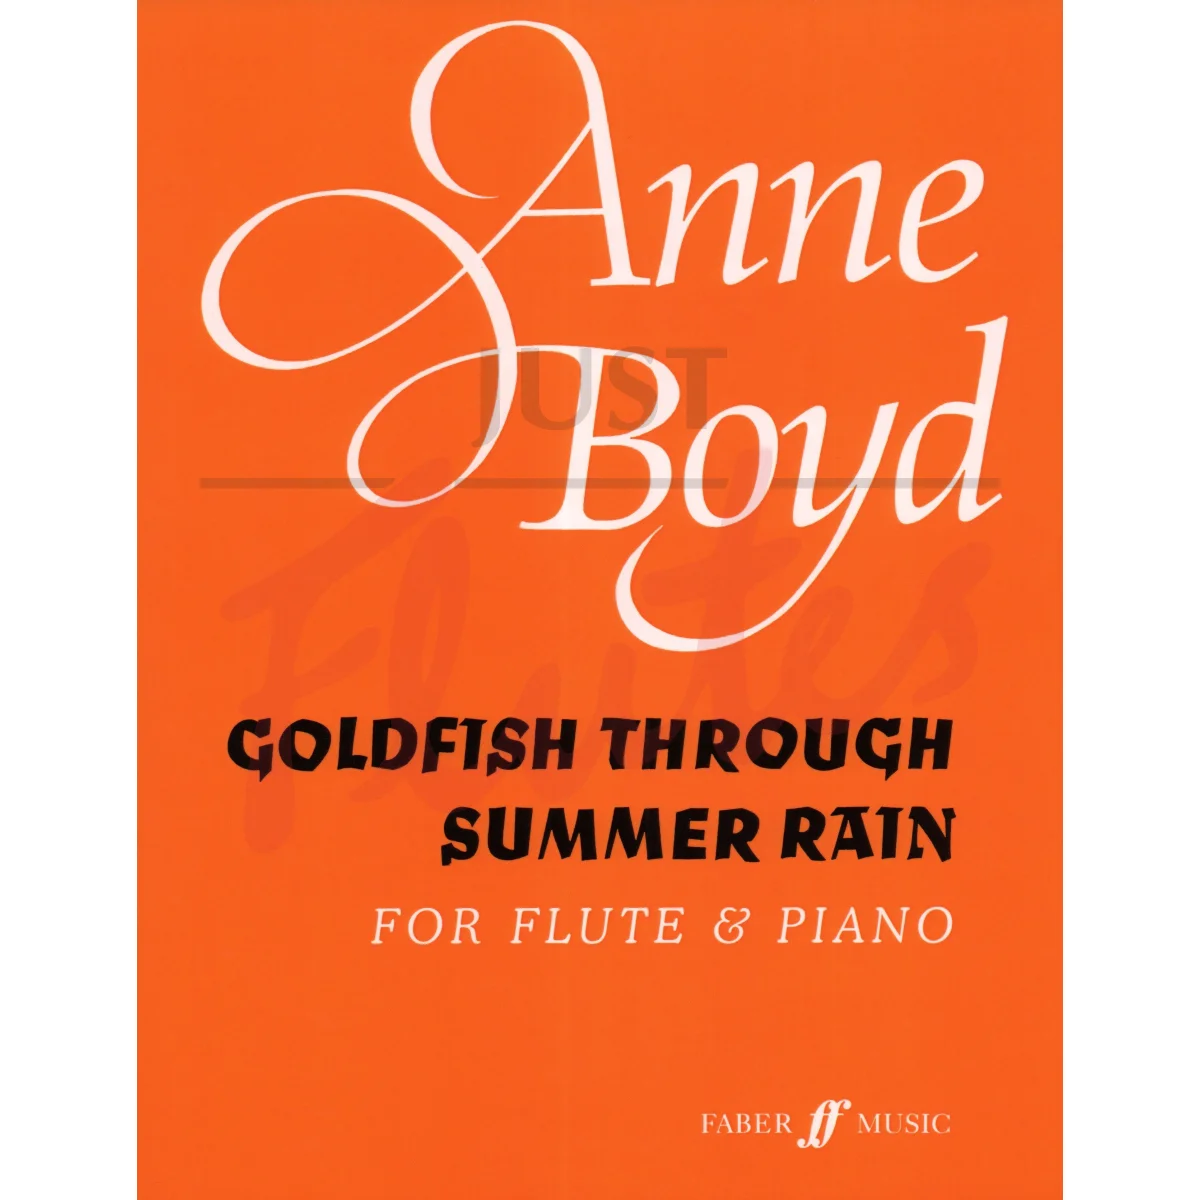 Goldfish Through Summer Rain for Flute and Piano